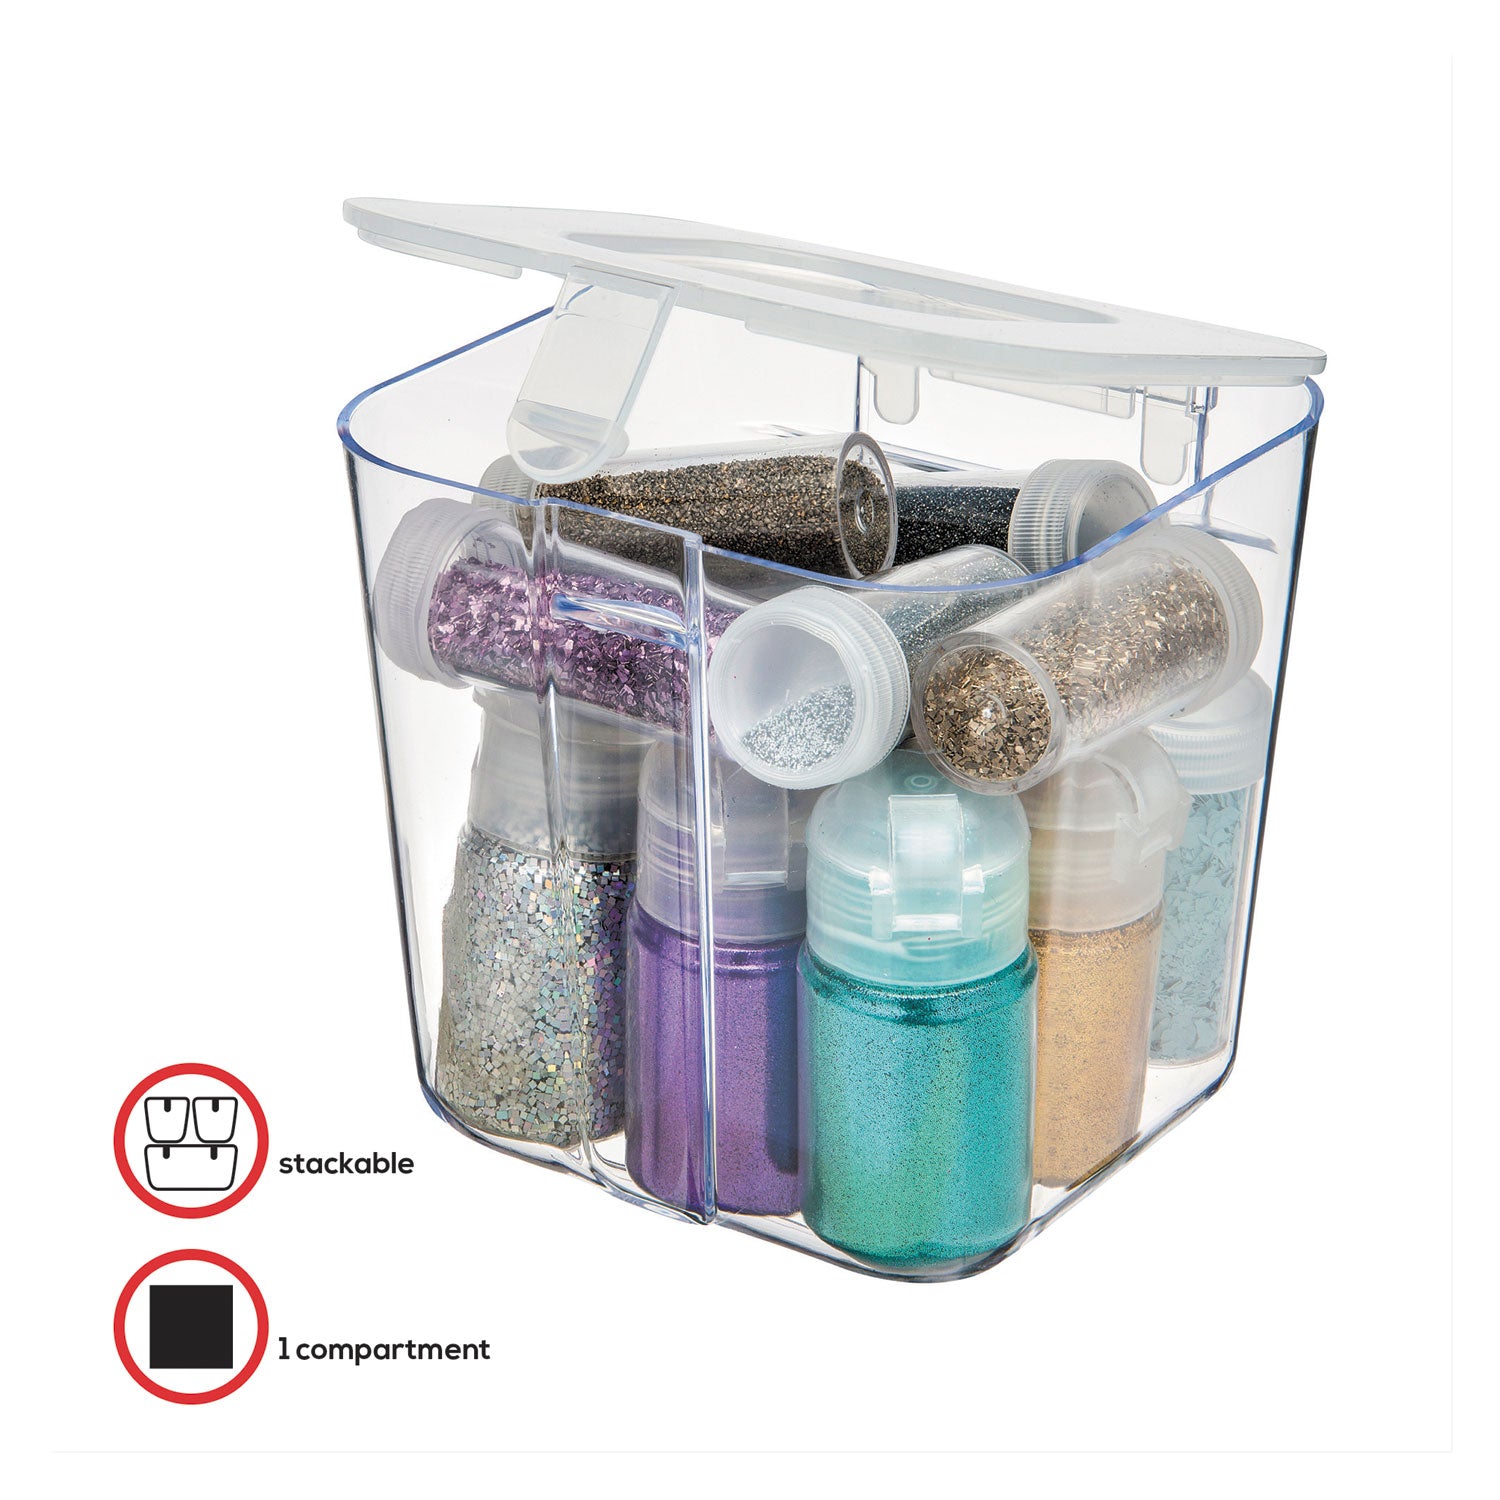 stackable-caddy-organizer-small-plastic-433-x-4-x-438-white_def29101cr - 4